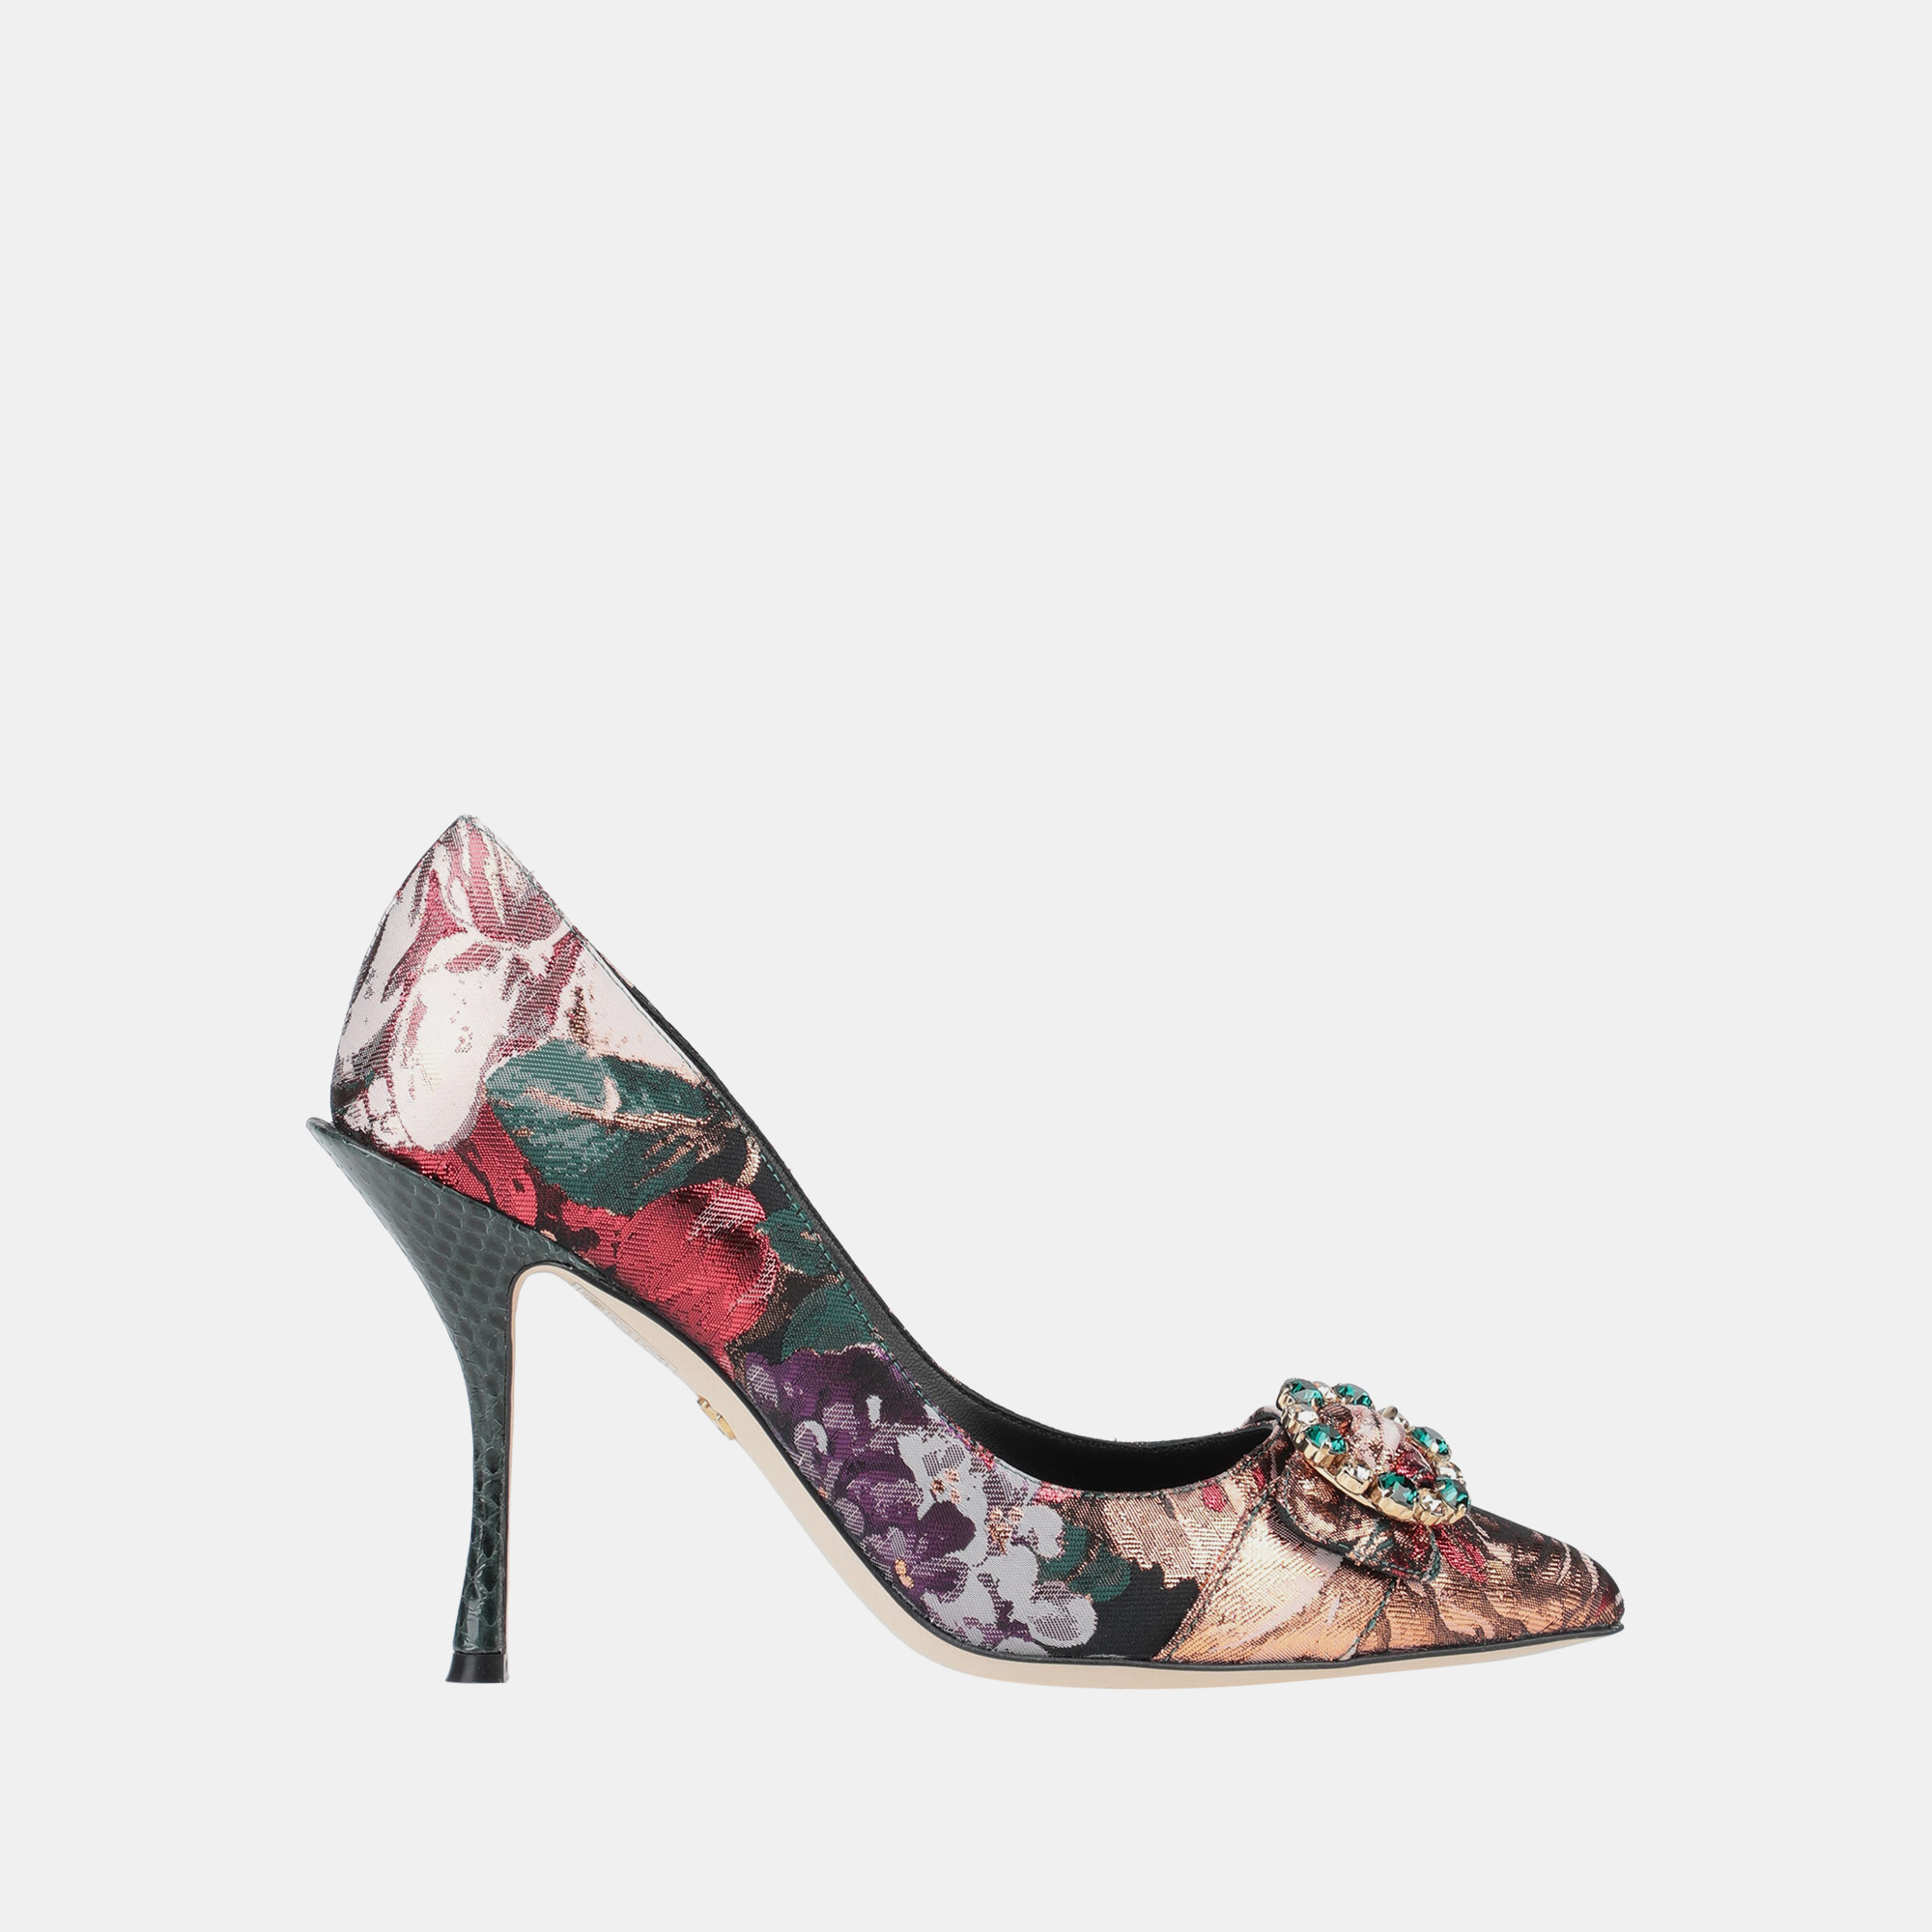 Pre-owned Dolce & Gabbana Snakeskin And Brocade Fabric Pumps Size 35.5 In Multicolor